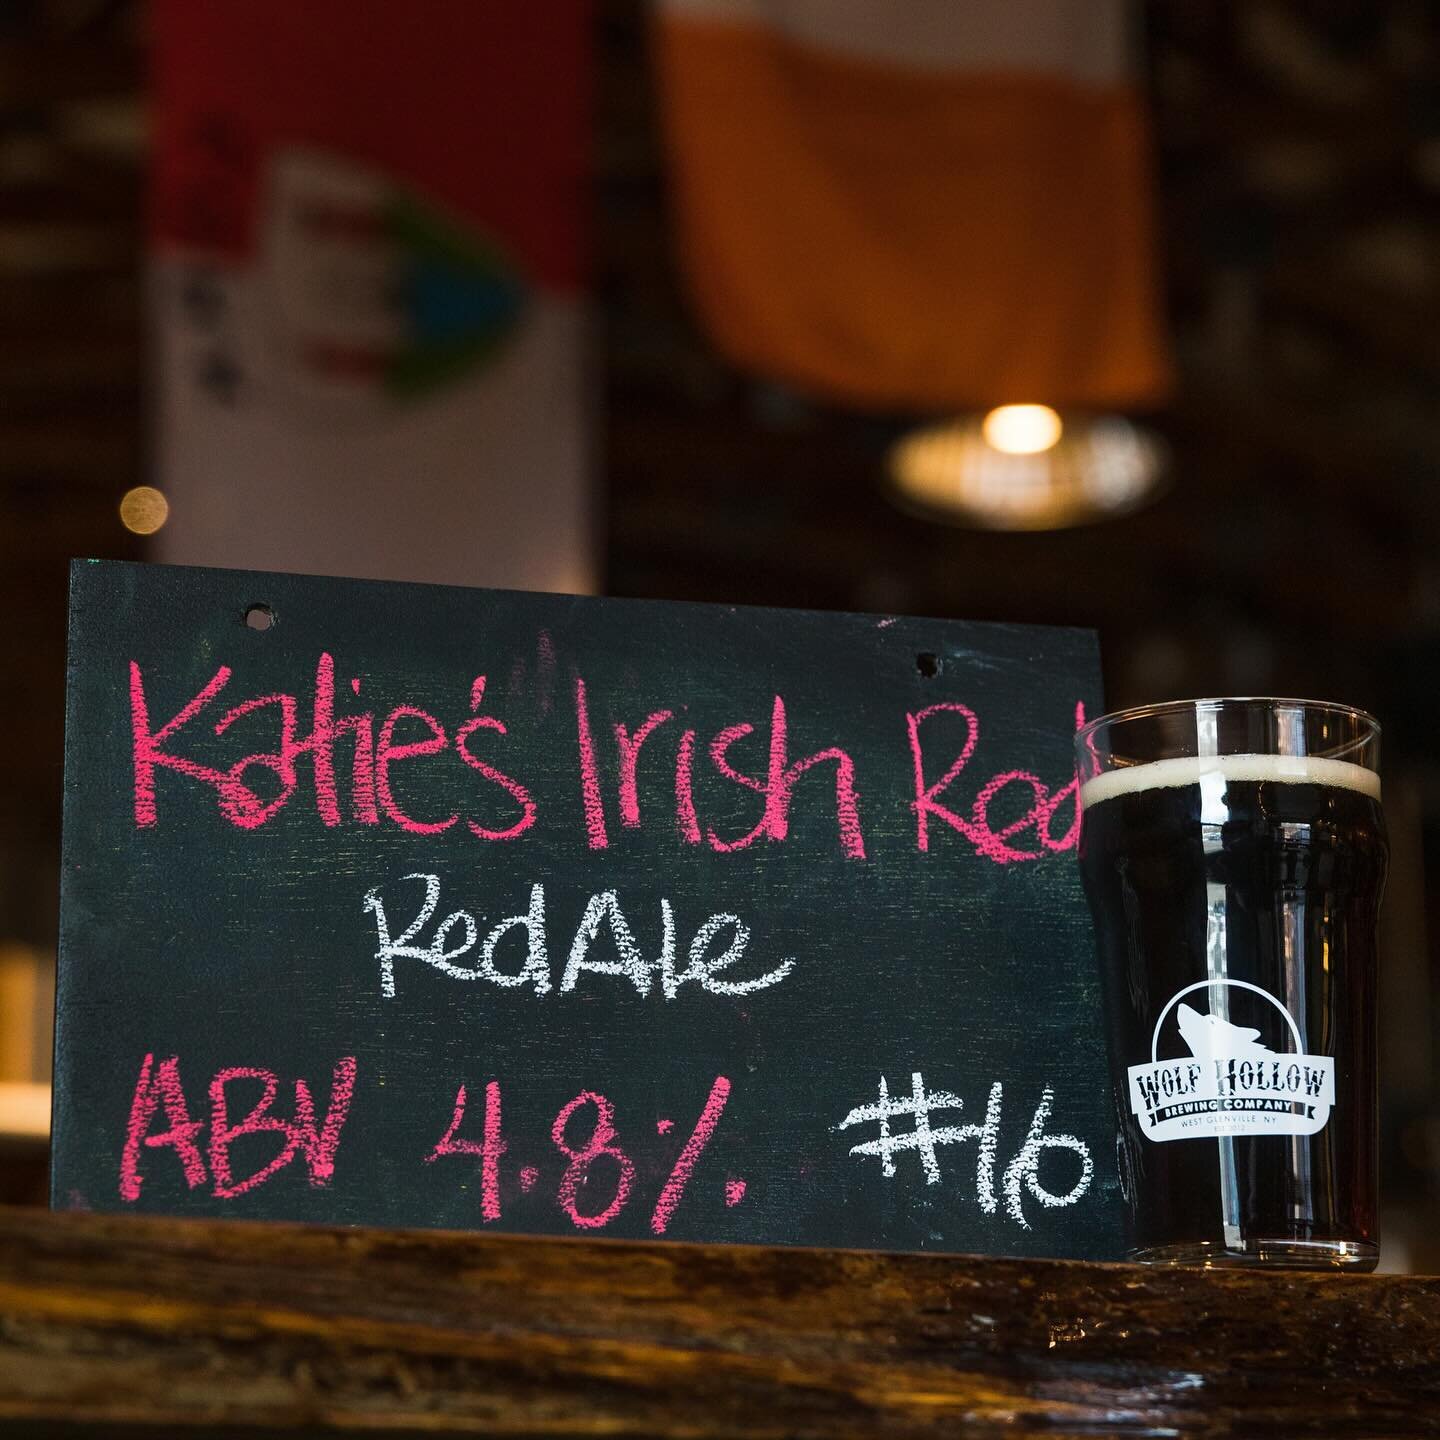 Happy parade day! $6 Campout stout pints all day today and Sunday. We also got Katie&rsquo;s Irish Red on draft for the weekend as well! Food specials all weekend by @twofortheroadfood. Music at 6pm with The West Glenville Ramblers.  #stpatricksday #